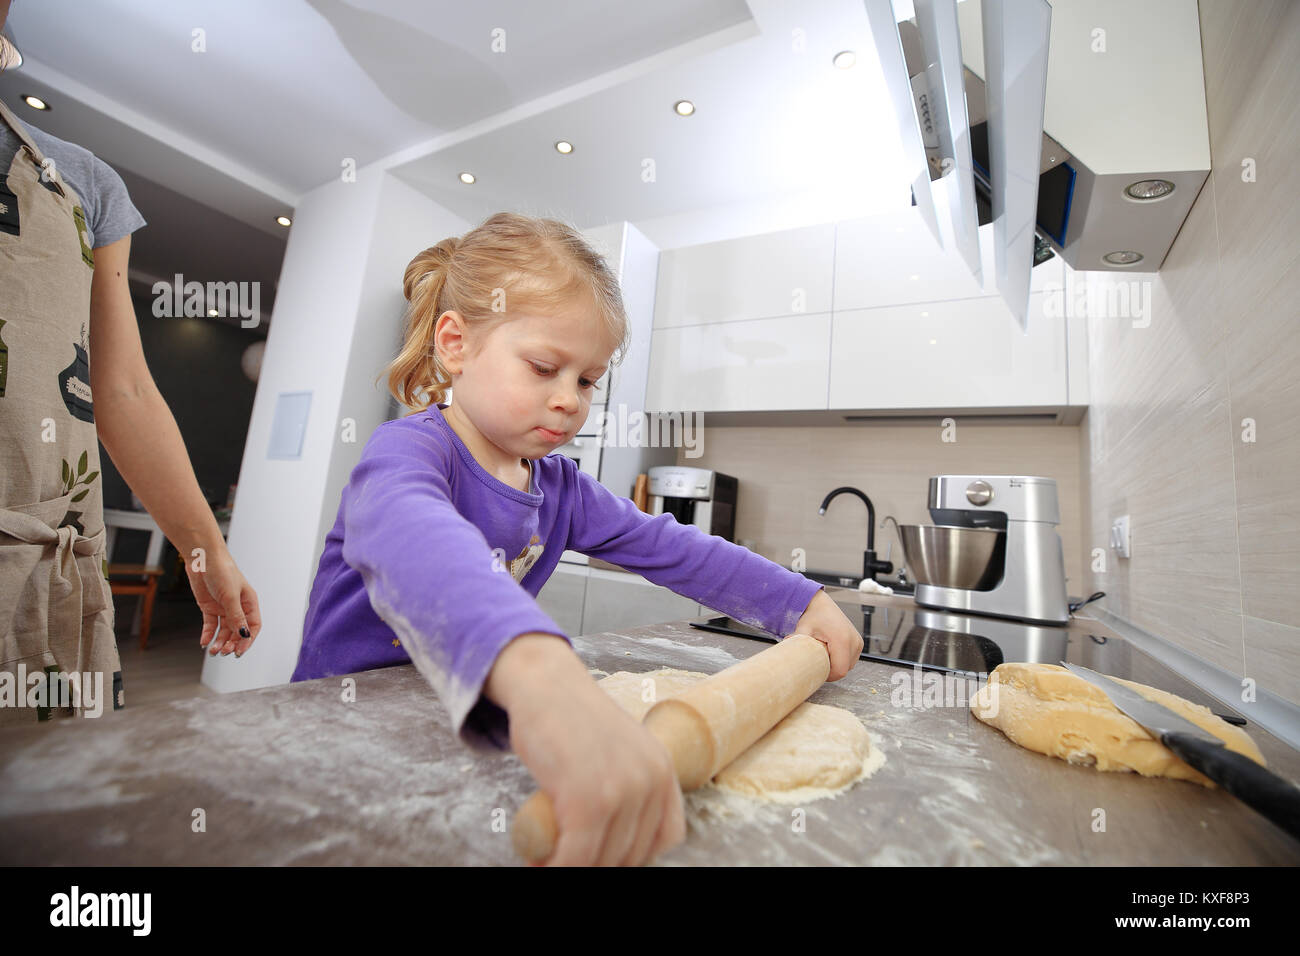 Little daughter helps mom to bake a cake. Toddler girl uses rolling pine in the kitchen. Stock Photo